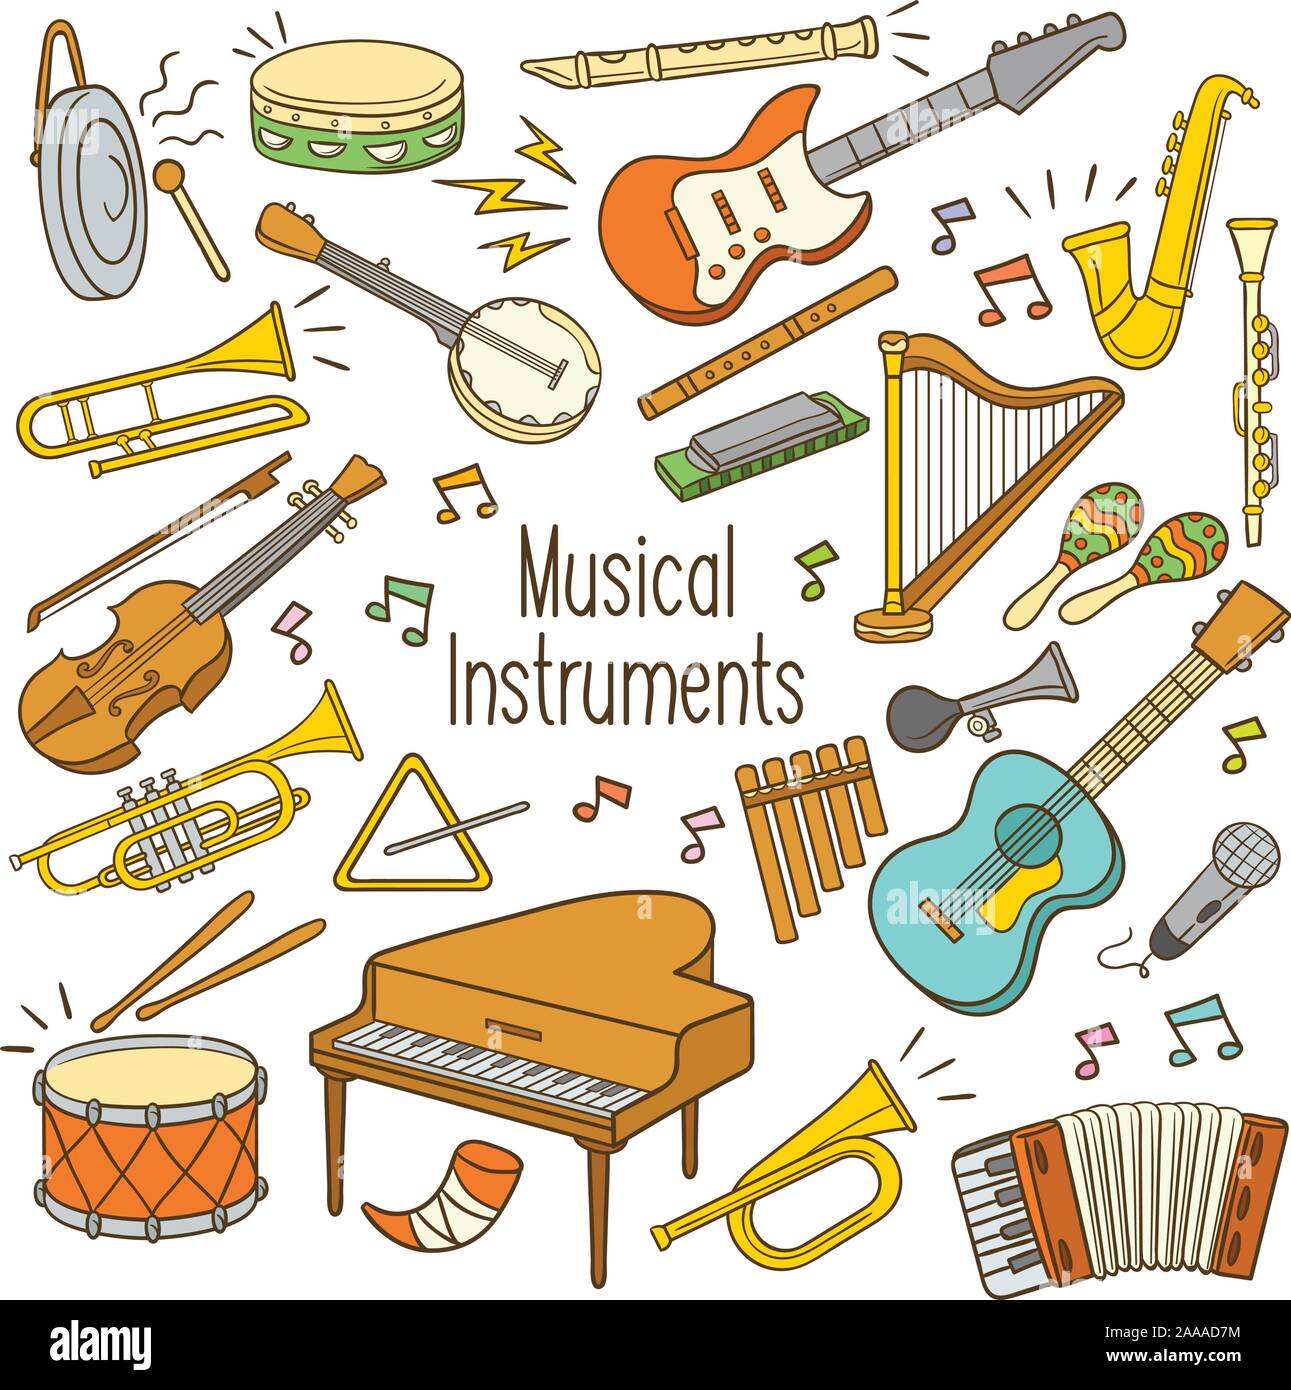 Musical instruments drawing Part 1 - YouTube